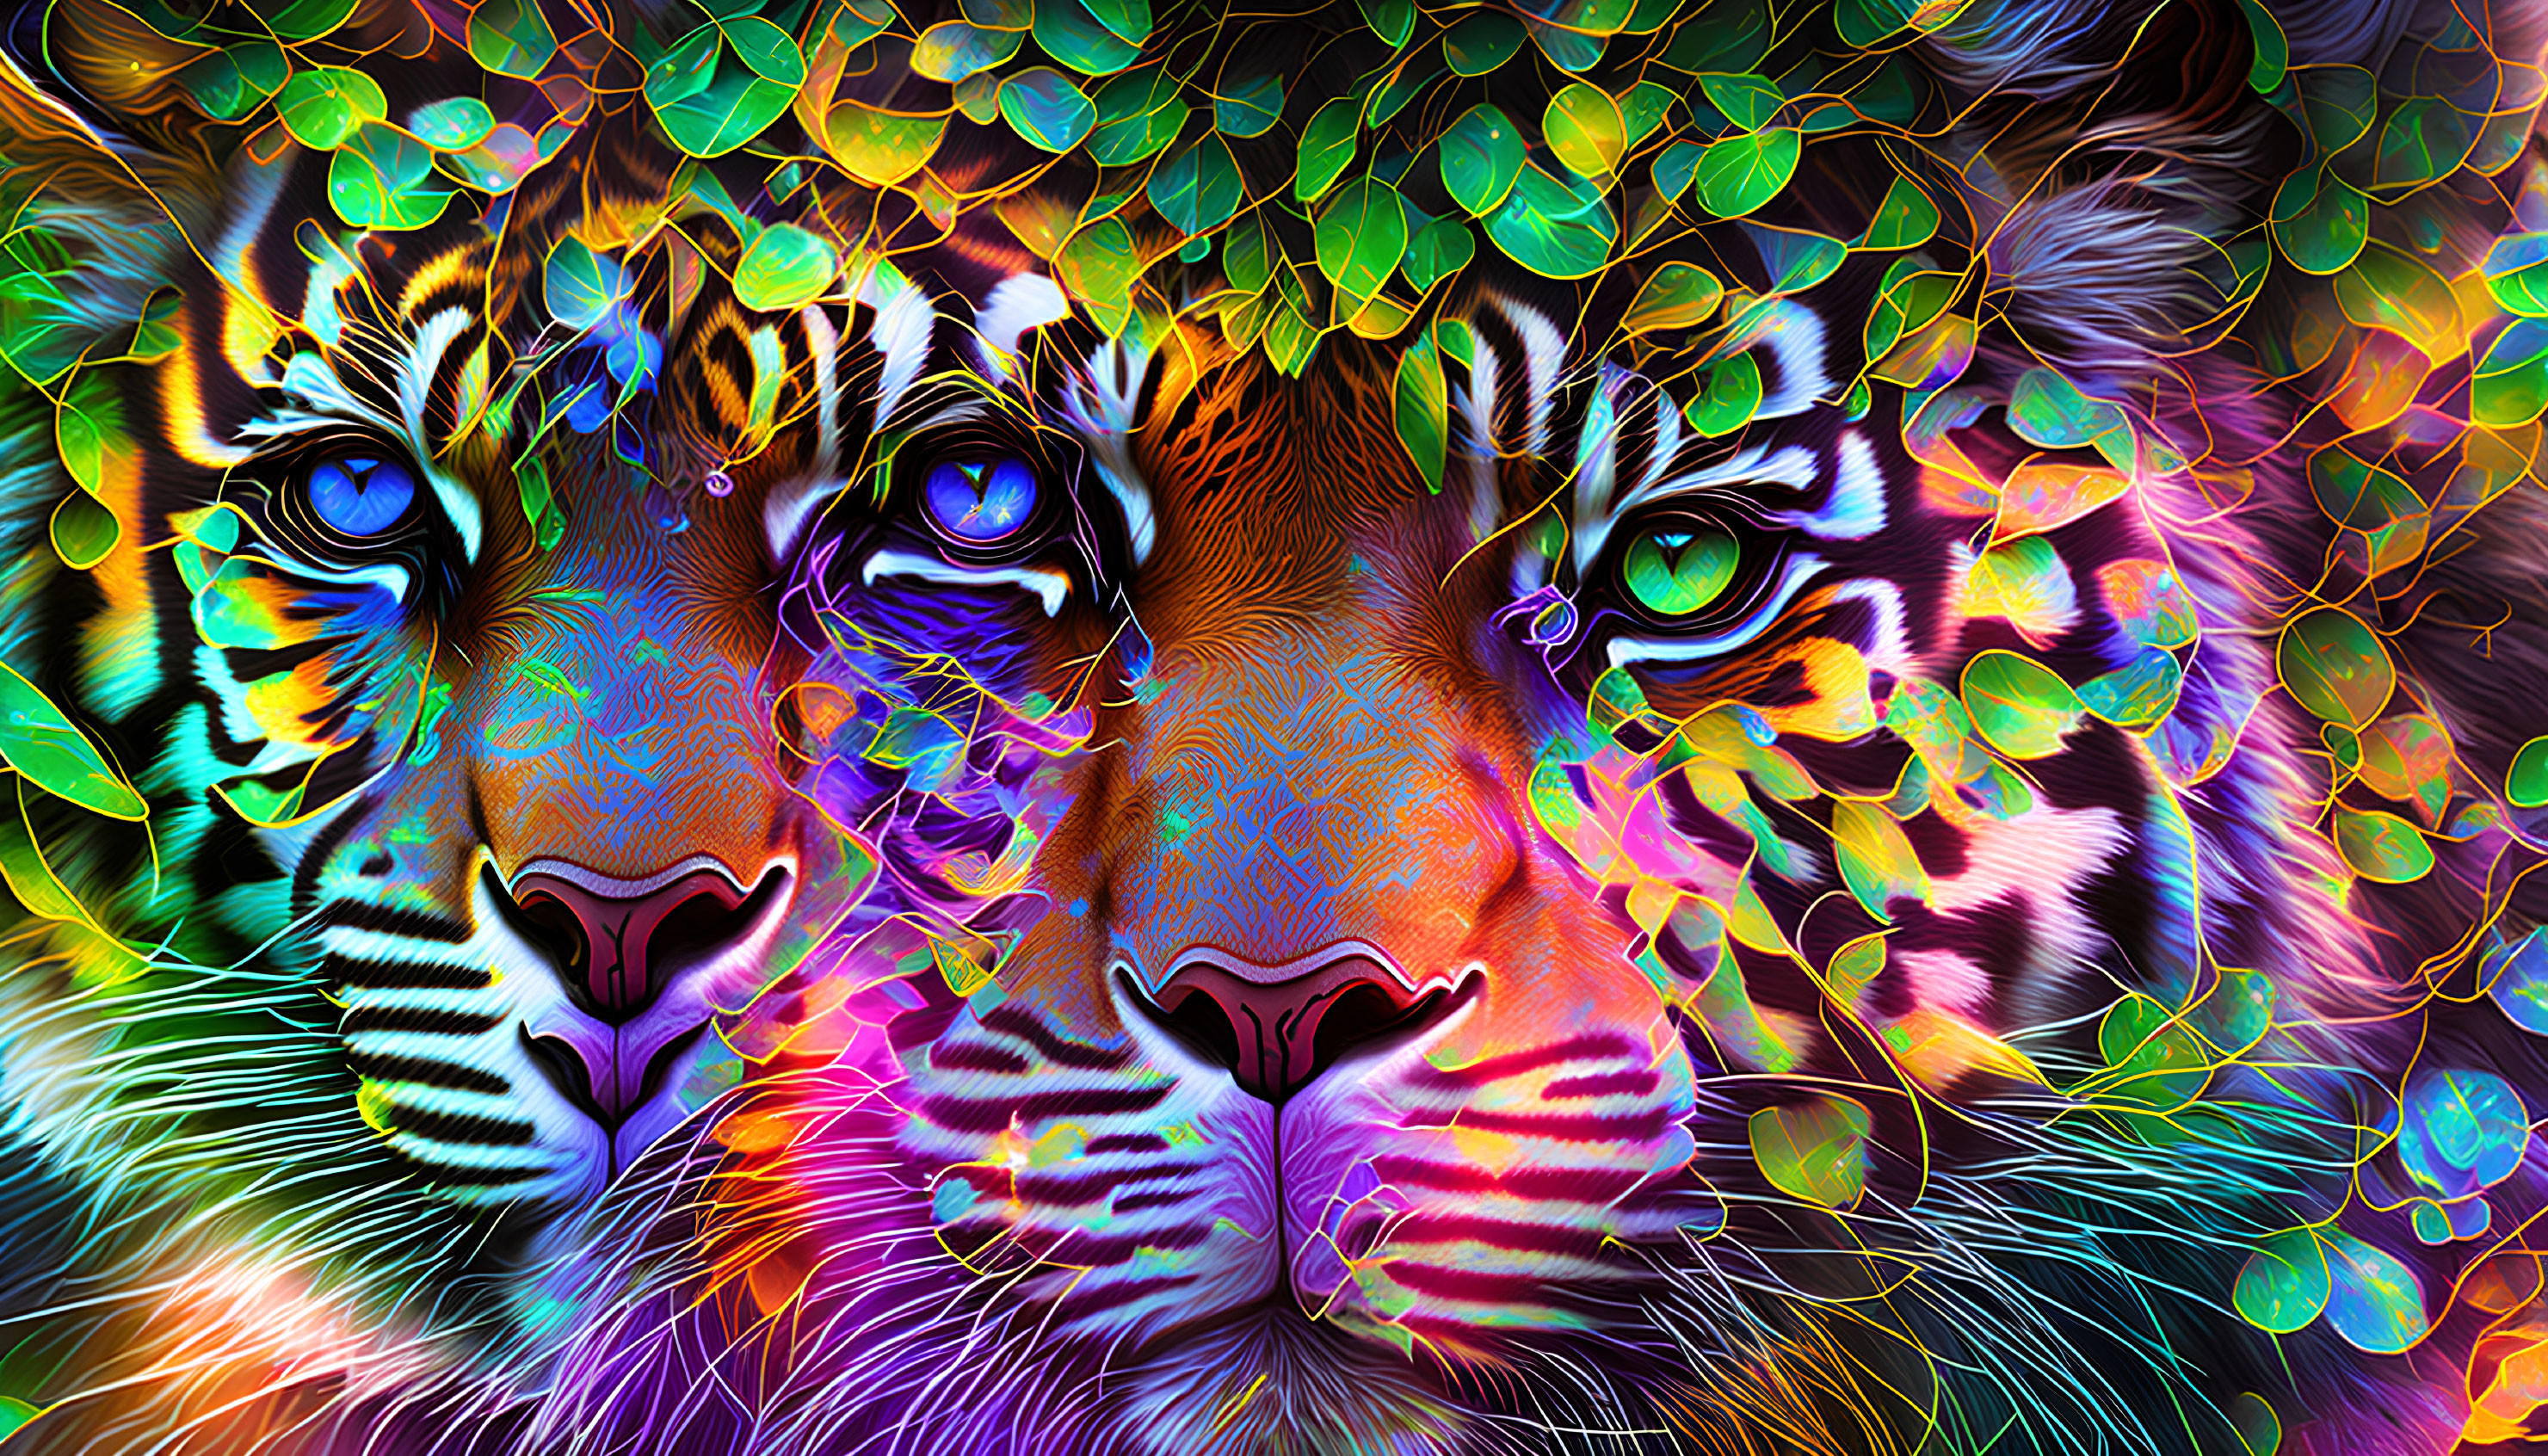 Vibrant Psychedelic Digital Art: Two Tigers in Kaleidoscope of Colors